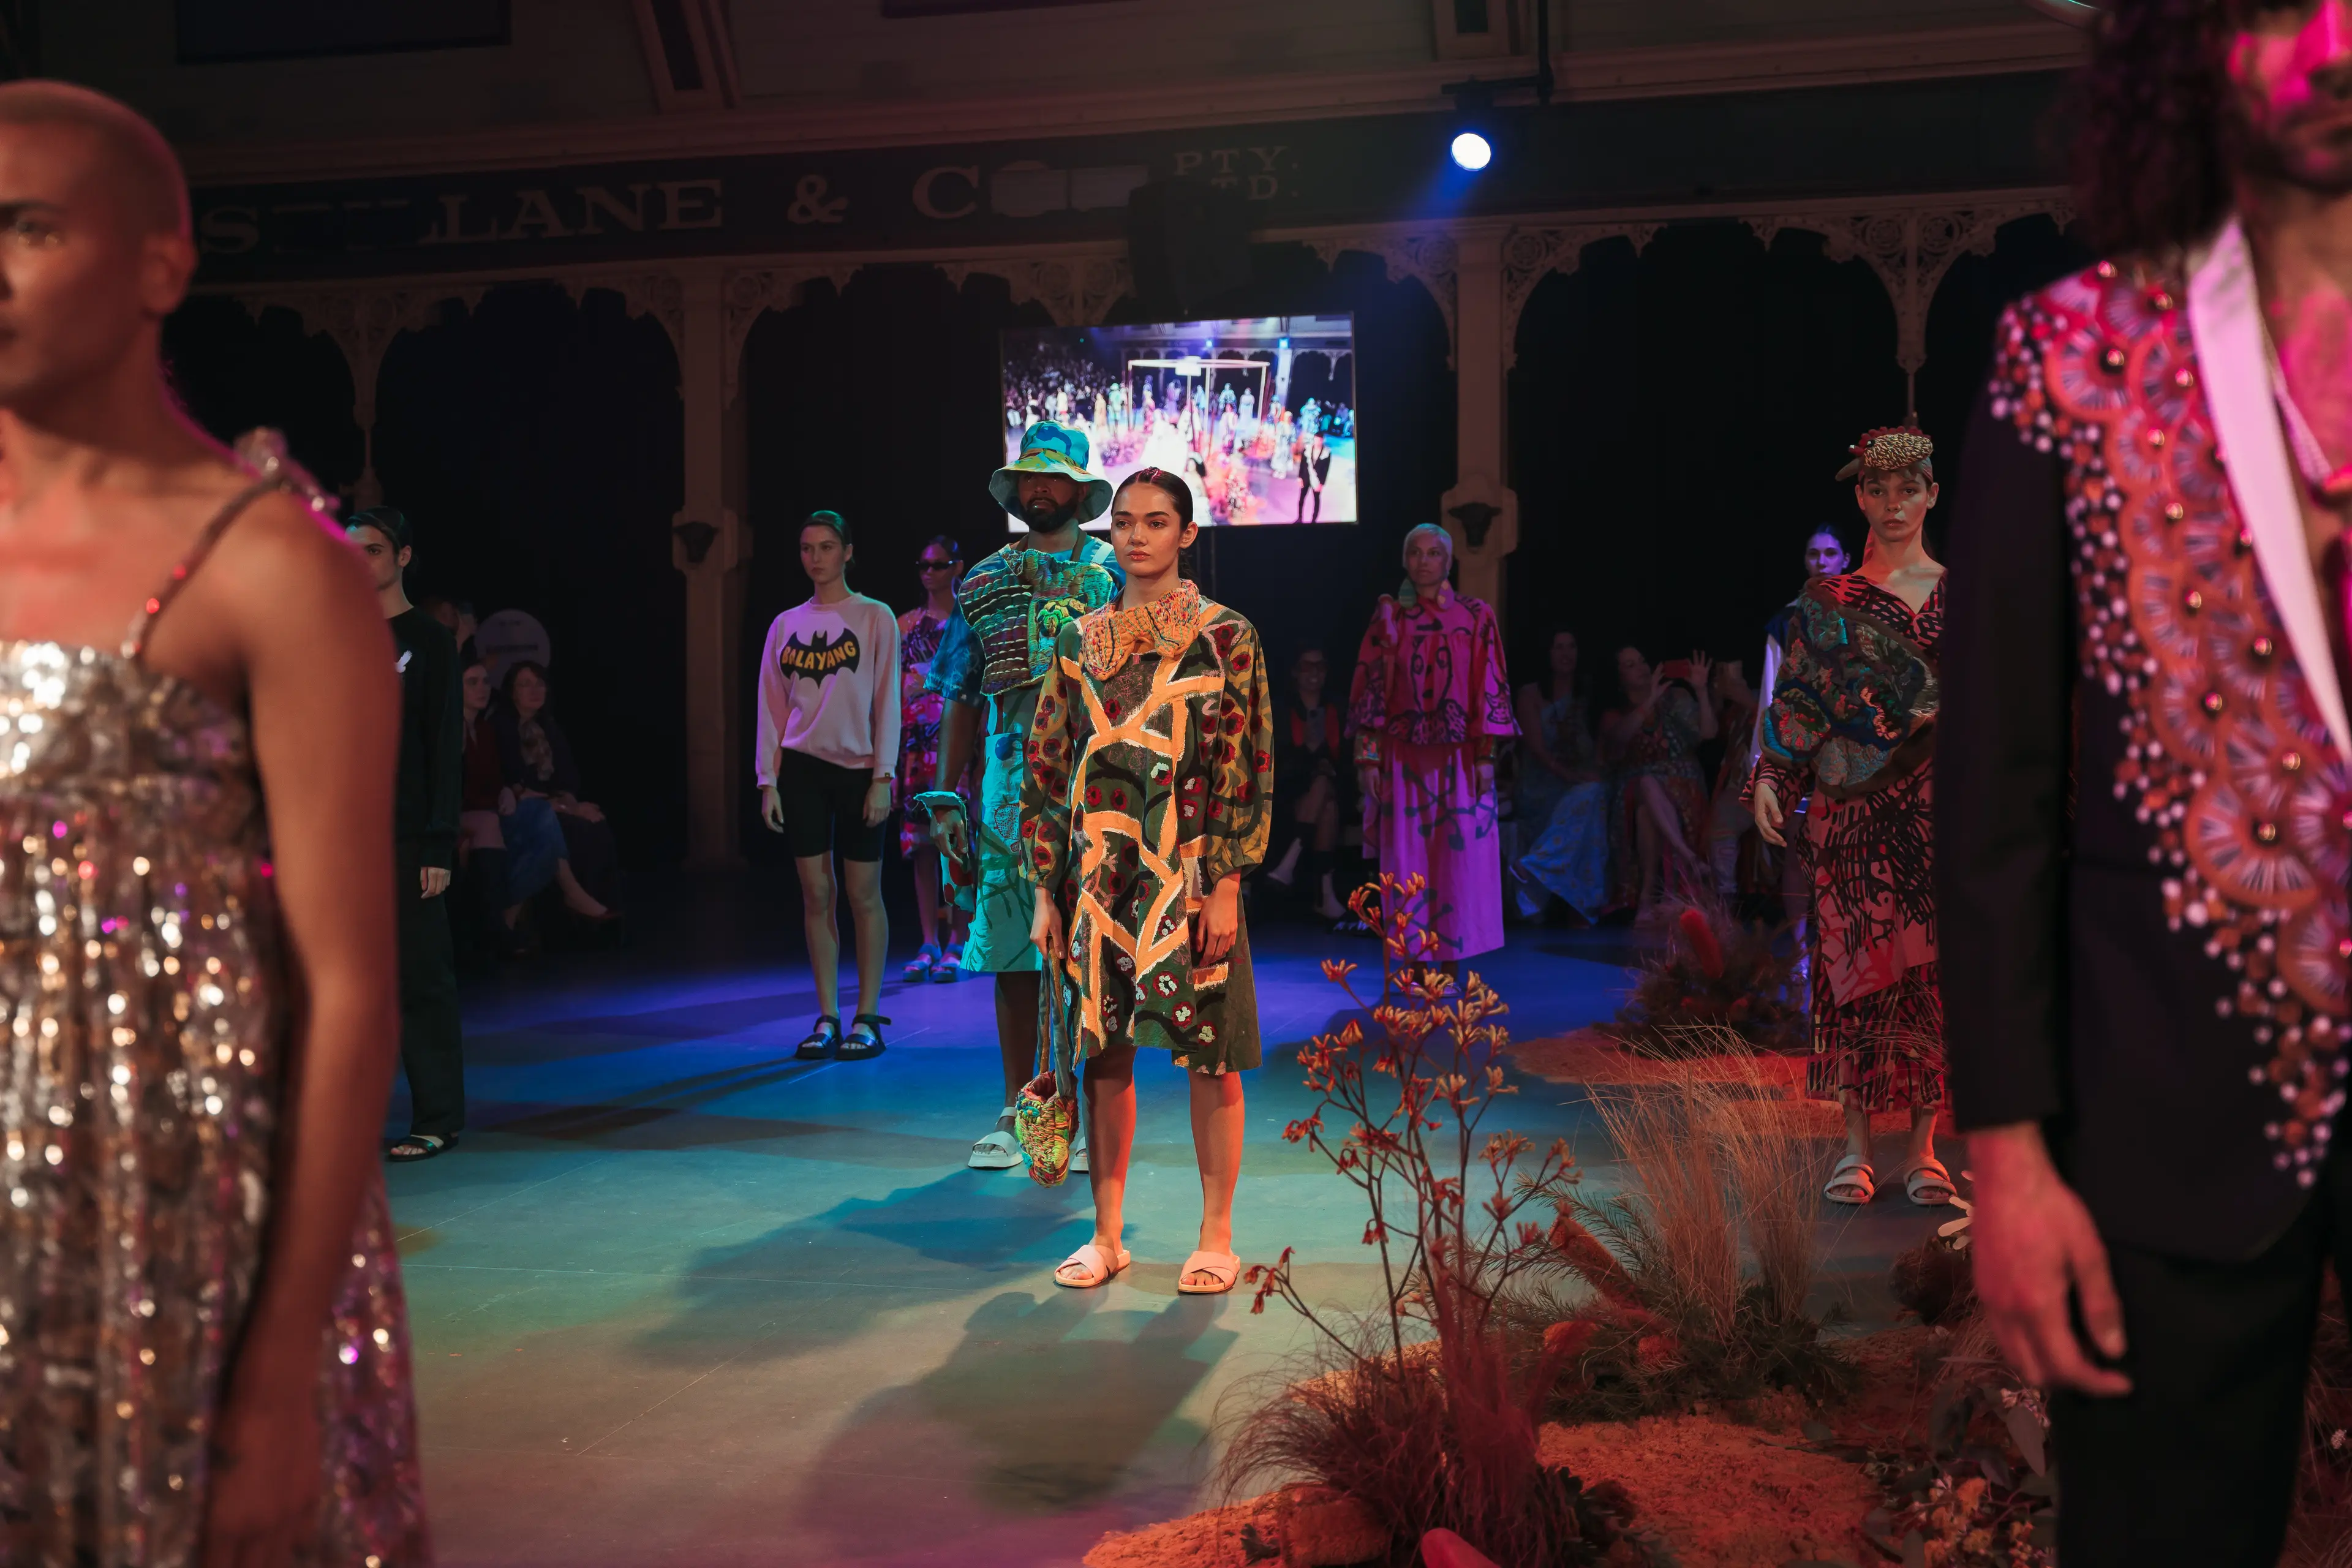 Melbourne Fashion Week Runways - fashion runway event and production - Melbourne, Australia